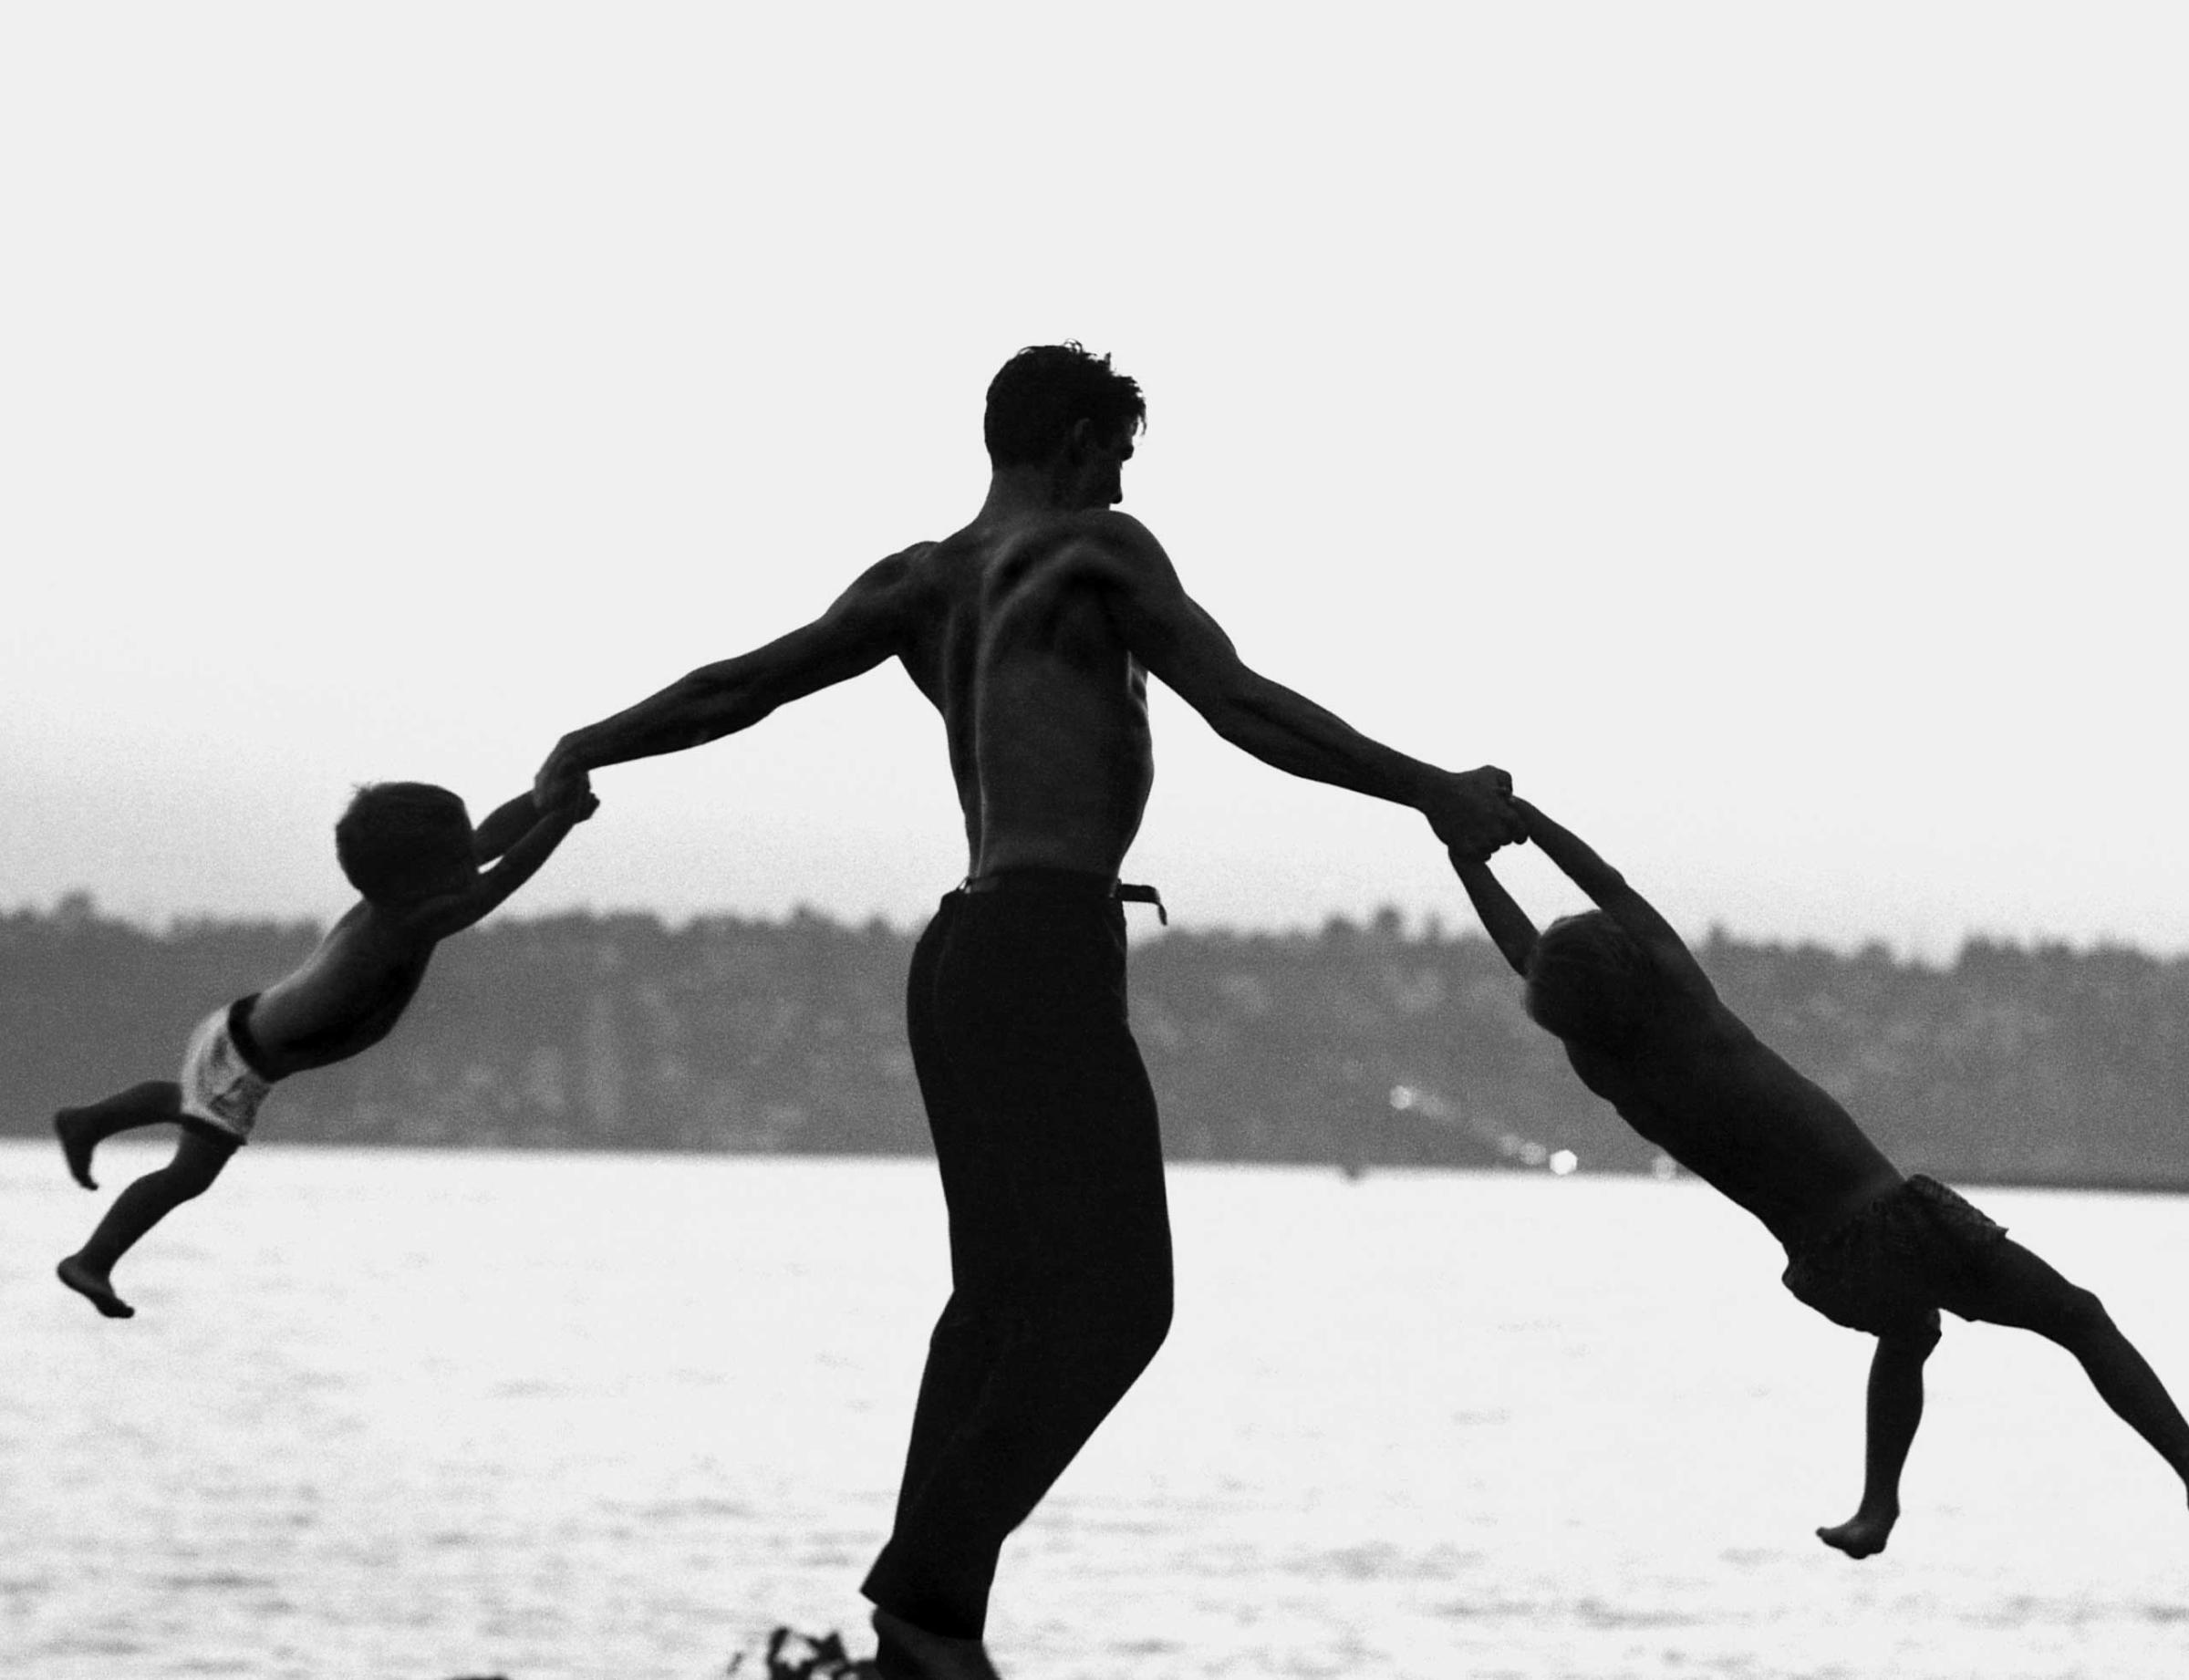 Dancer Jacques D'Amboise plays with his children near his home in Washington state, 1962.